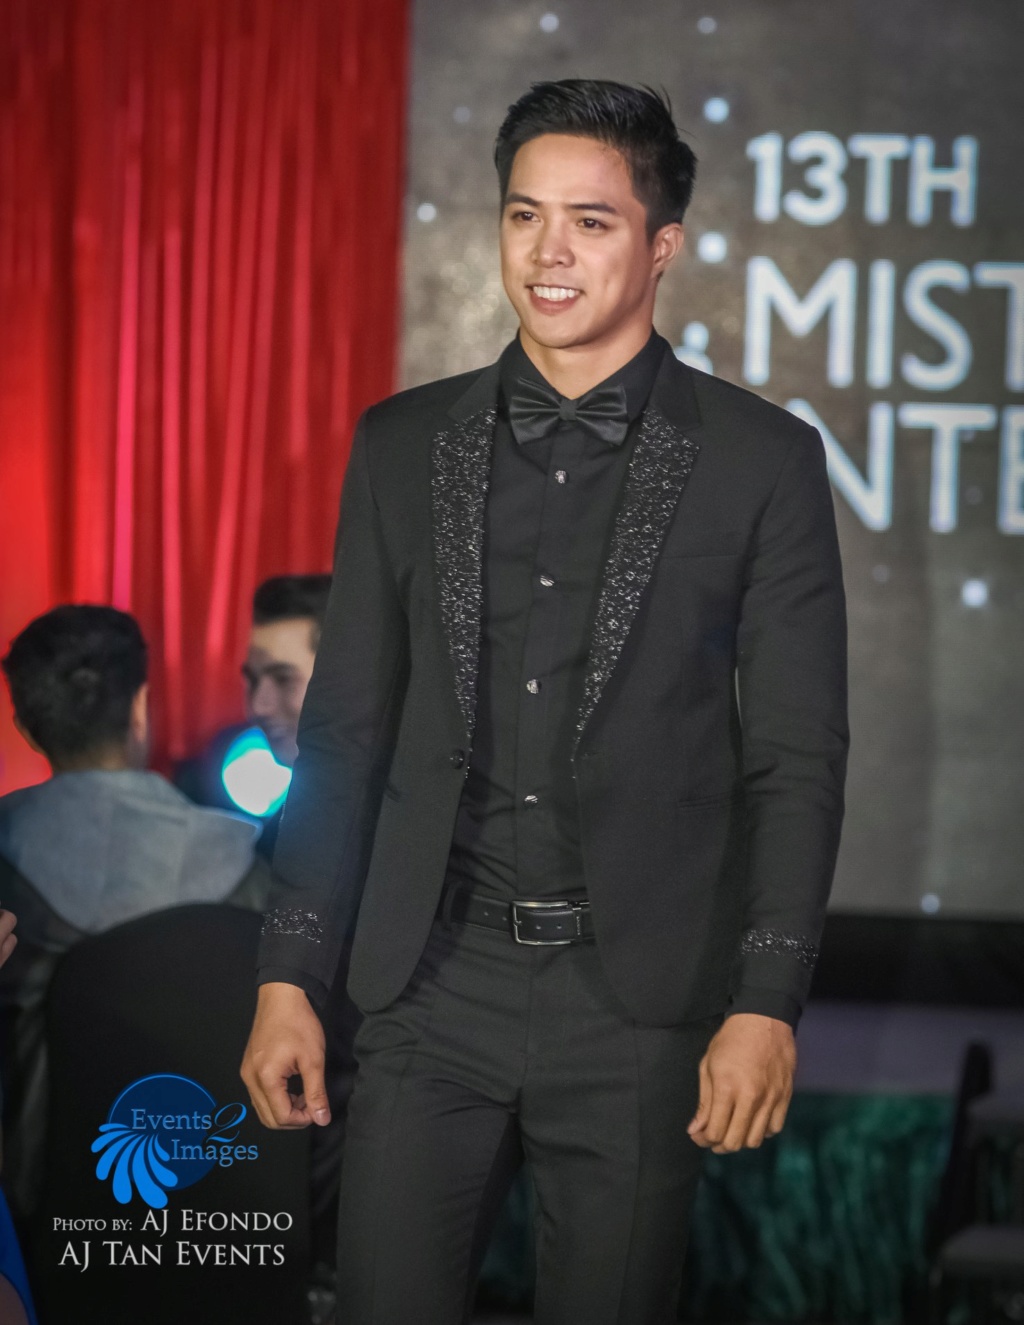 The 13th Mister International in Manila, Philippines on February 24,2019 - Page 10 52446210